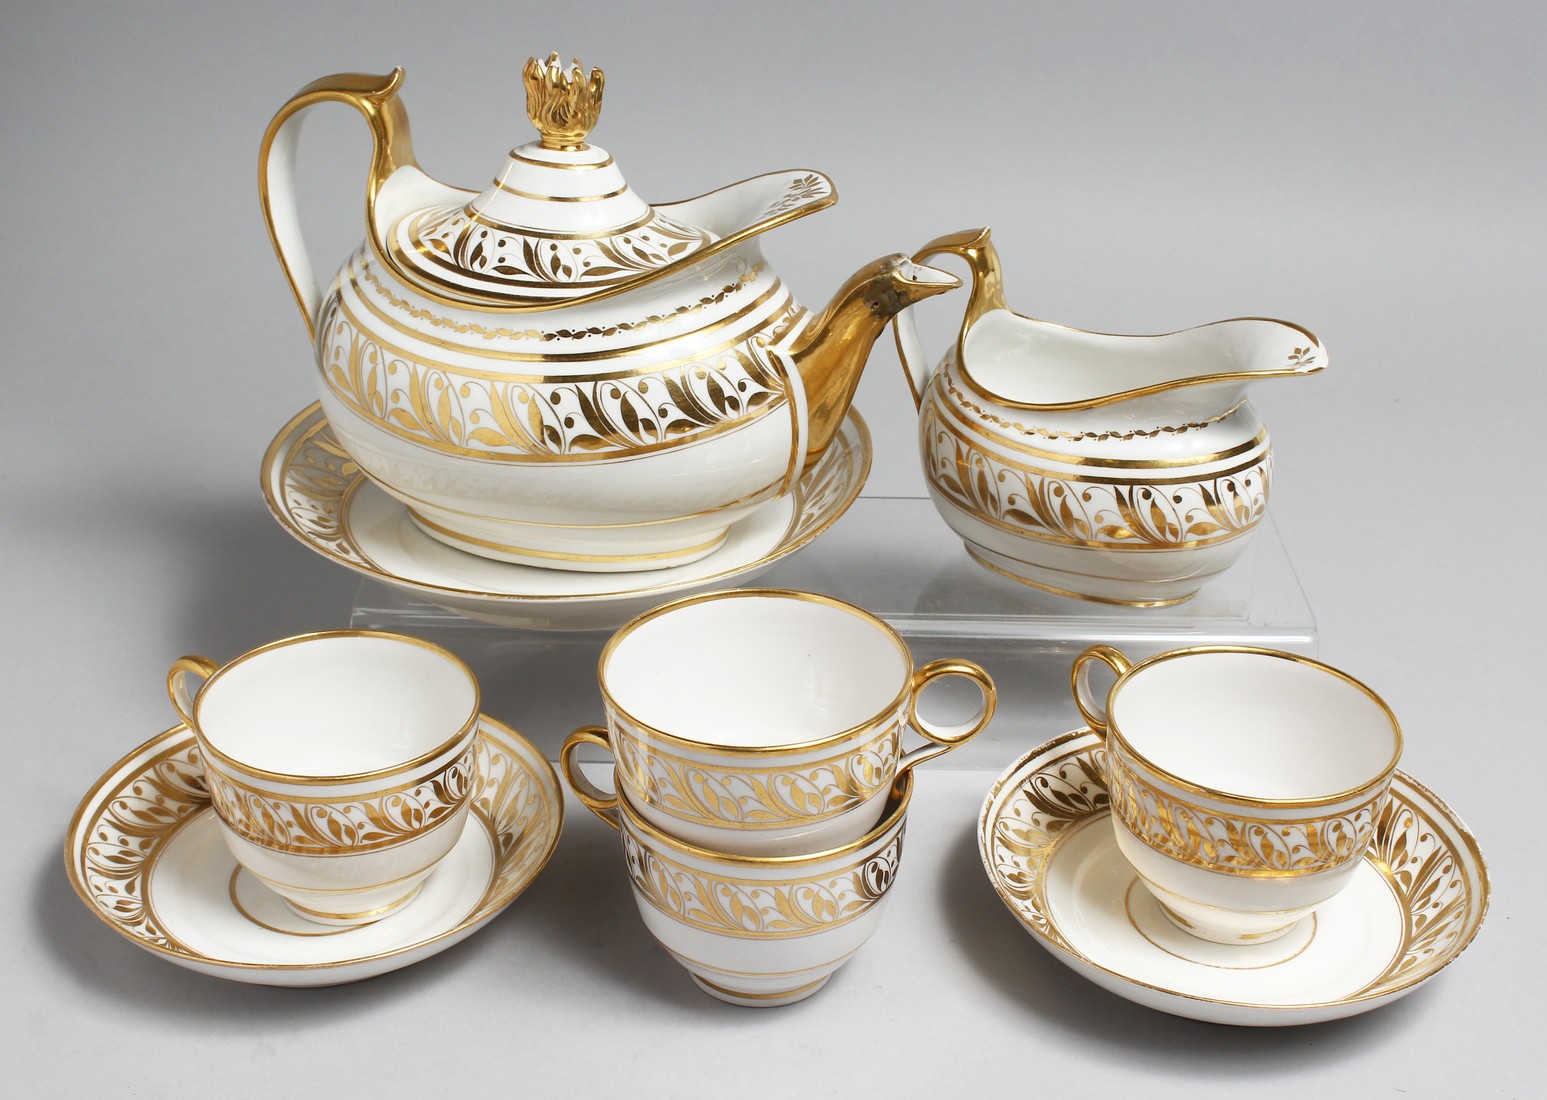 A FLIGHT BARR AND BARR WORCESTER REGENCY PART TEA SERVICE comprising a teapot and cover, cream